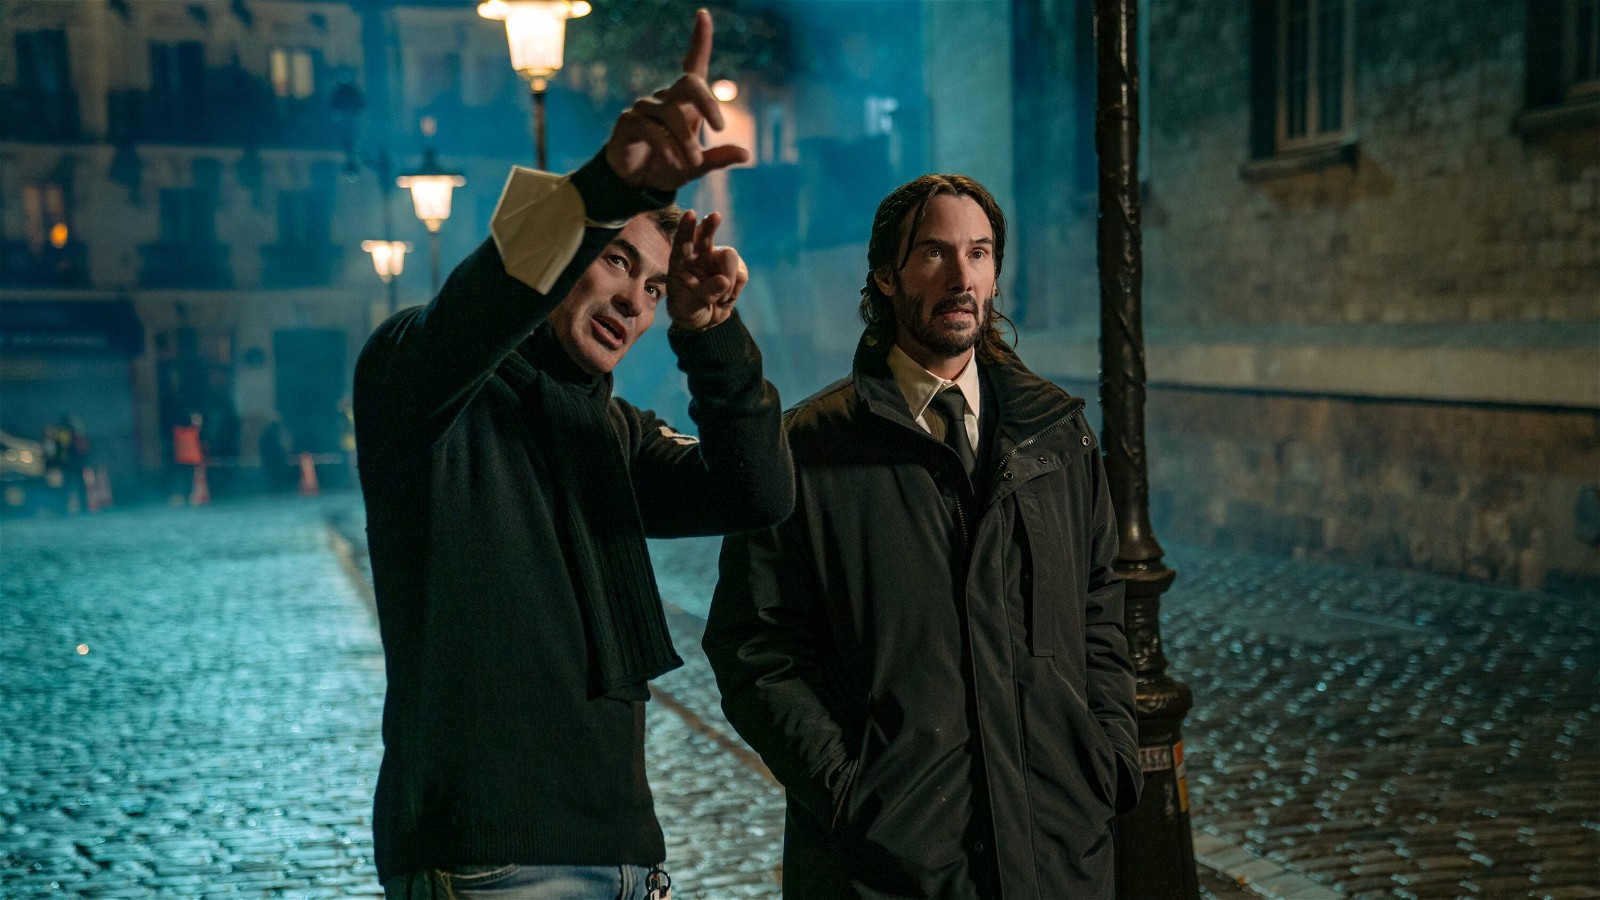 Keanu reeves and the Director Chad Stahelski